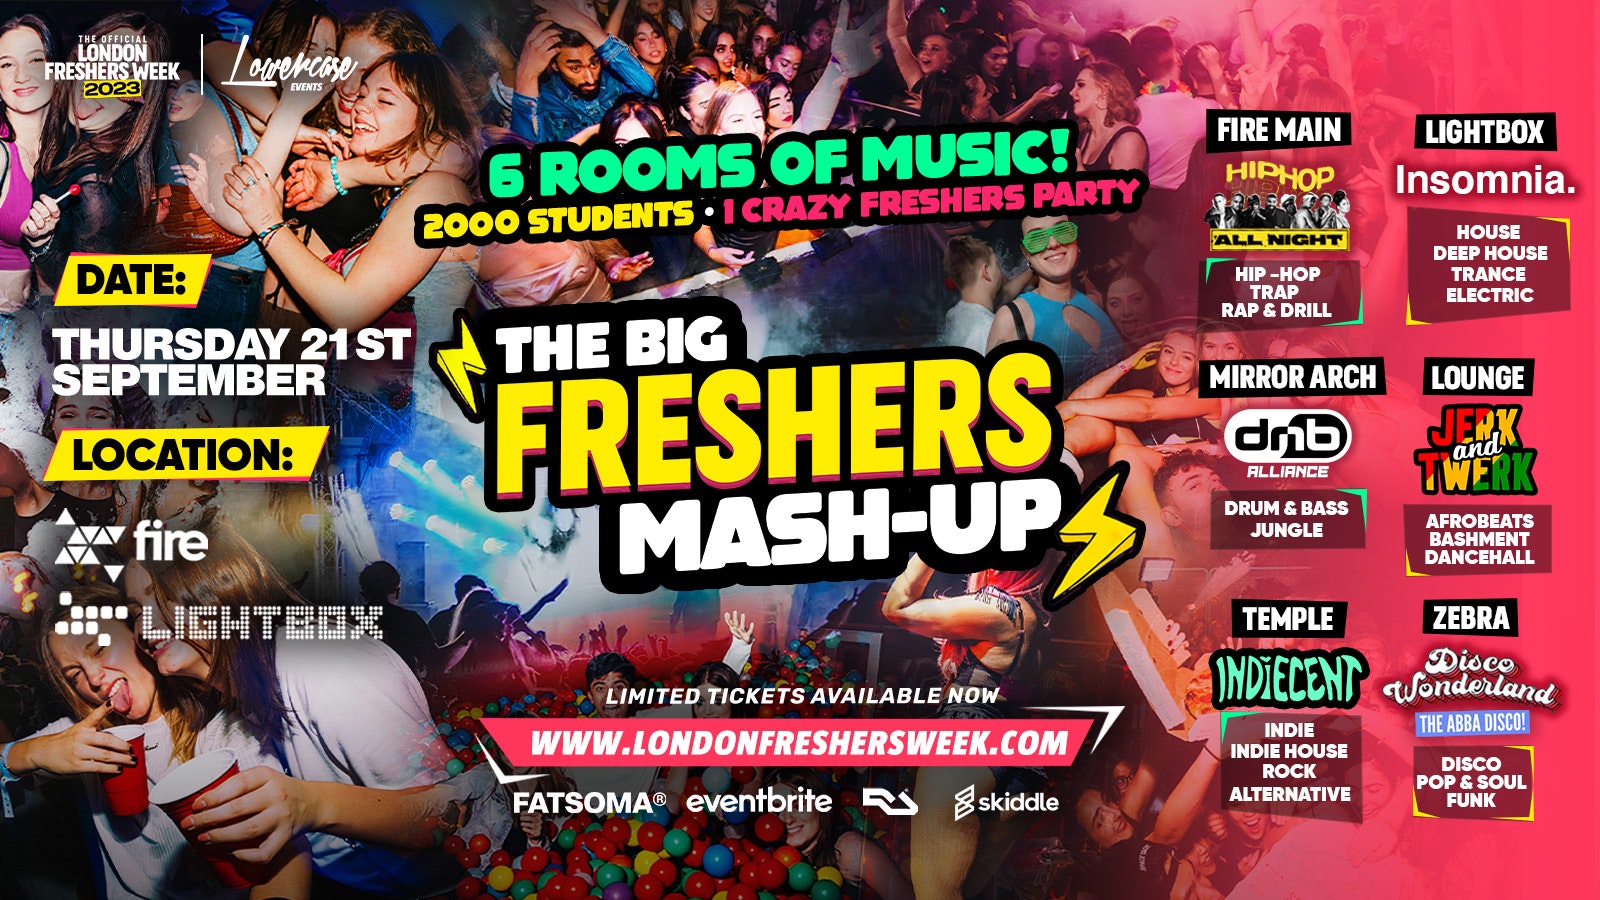 The Big London Freshers Mashup @ Fire & lightbox – Full Venue Takeover – 6 HUGE Brands + 2000 Students! THE ULTIMATE FRESHERS EXPERIENCE – London Freshers Week 2023 – [WEEK 1]